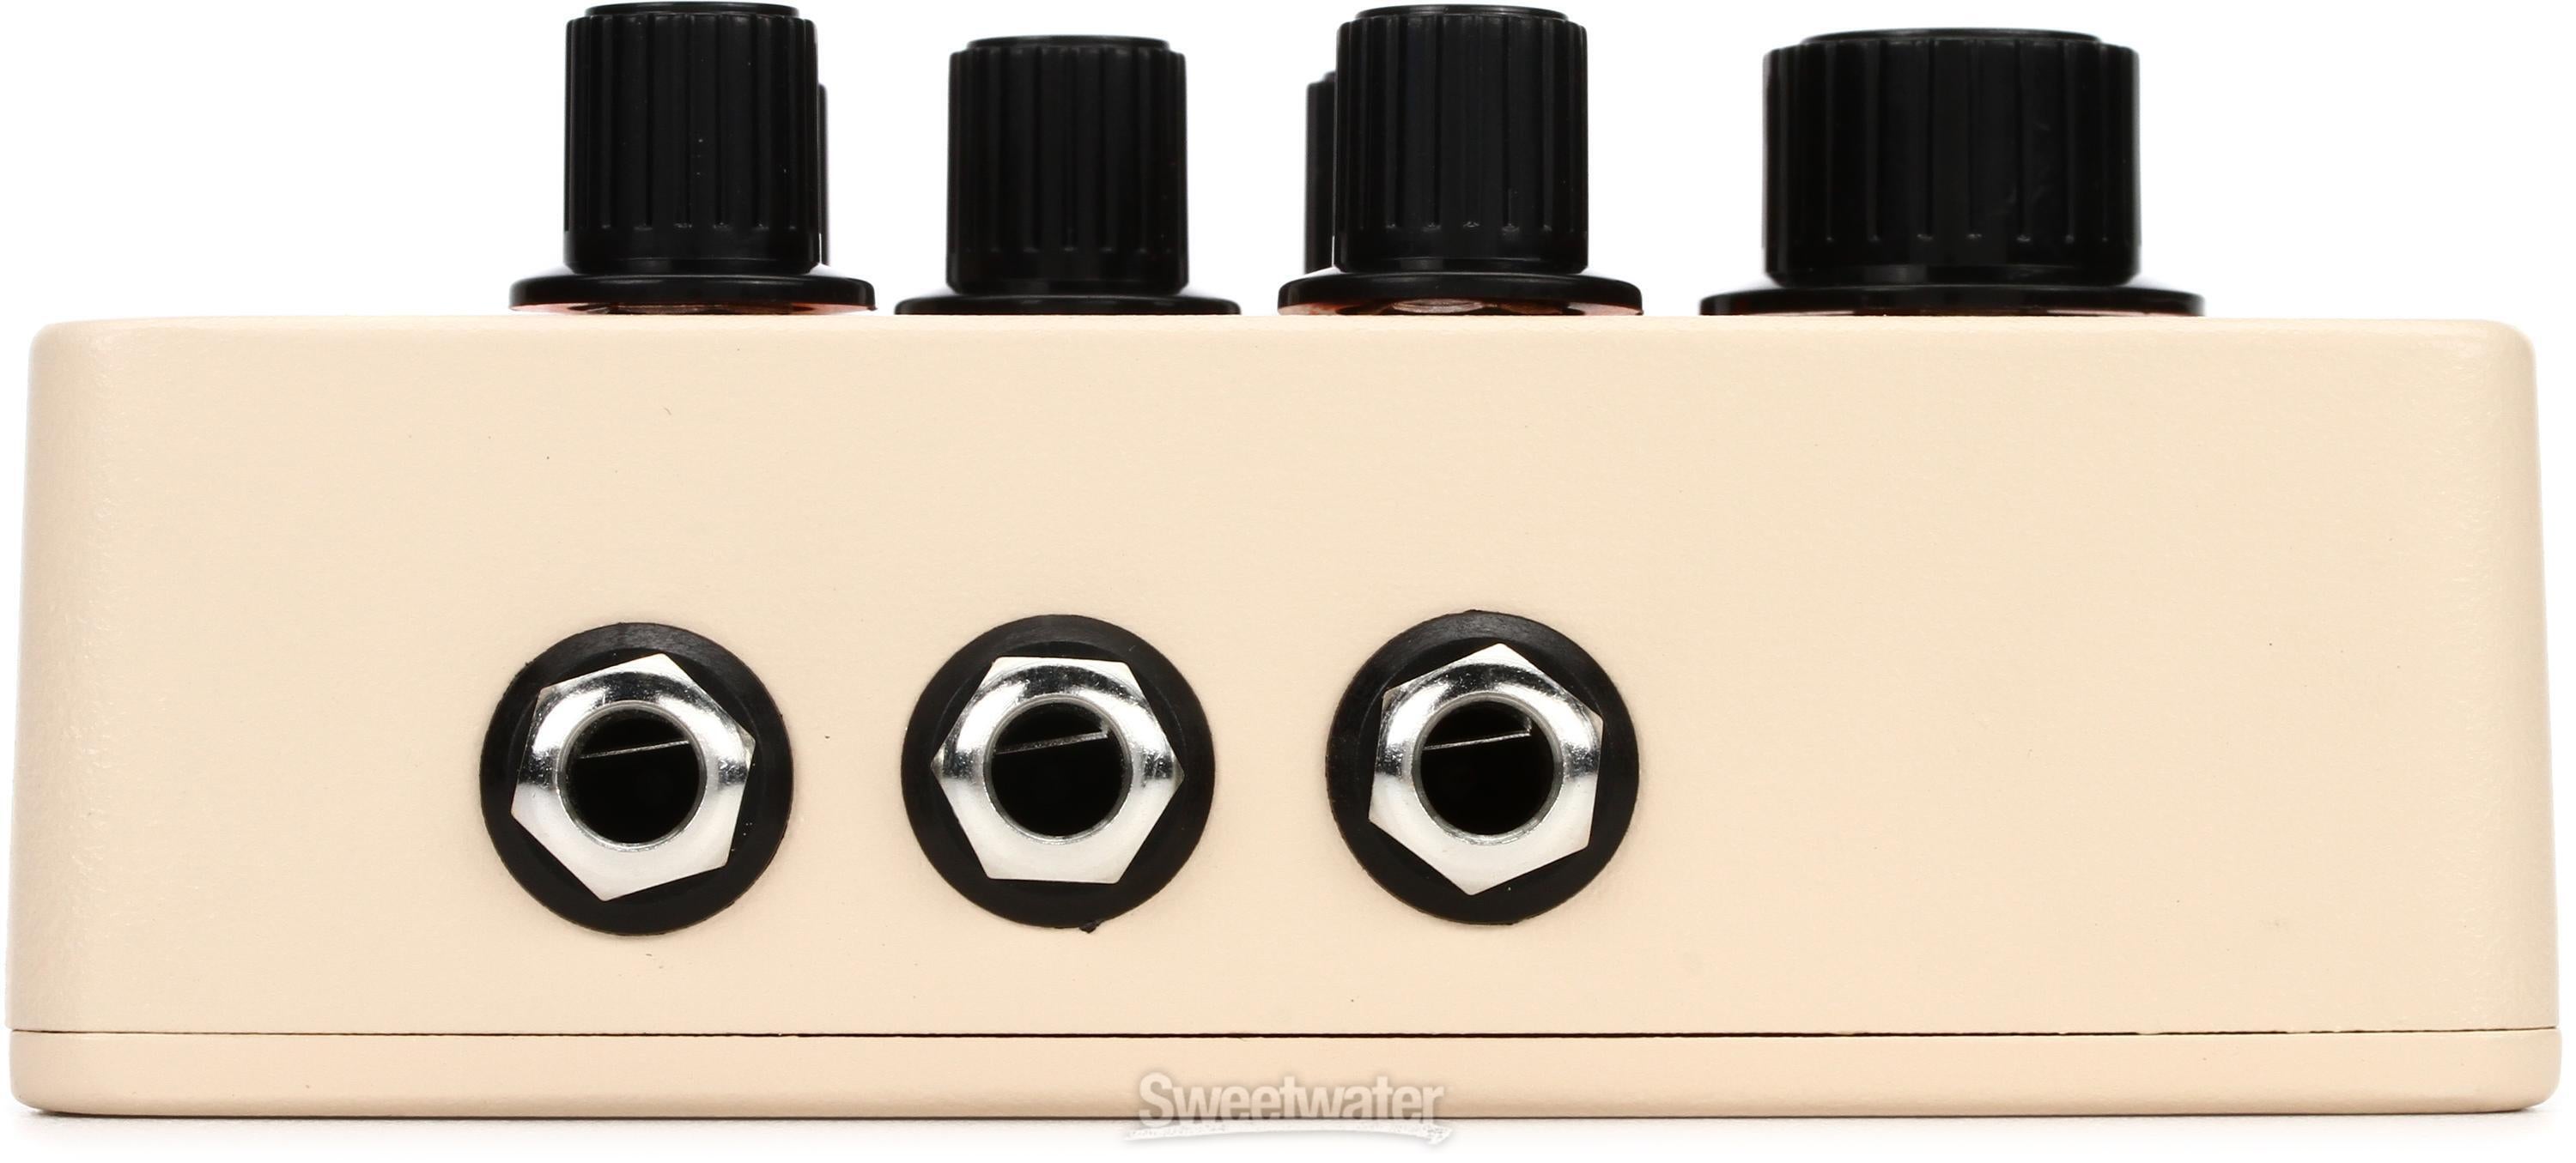 Orange Acoustic Guitar Preamp Pedal | Sweetwater